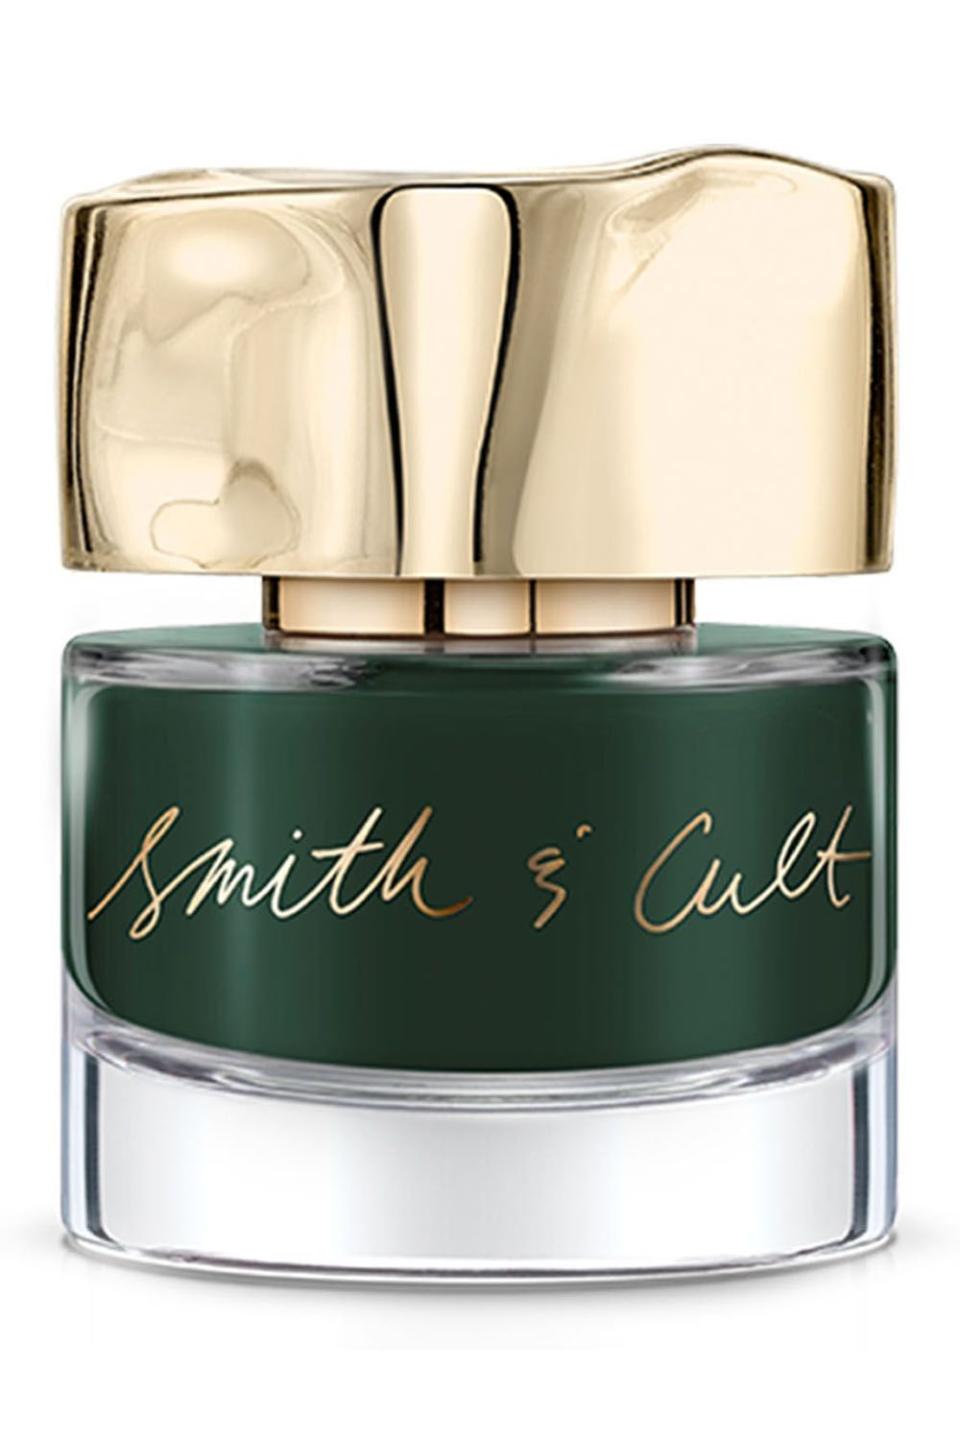 20) Smith and Cult Nail Lacquer in Darjeeling Darling